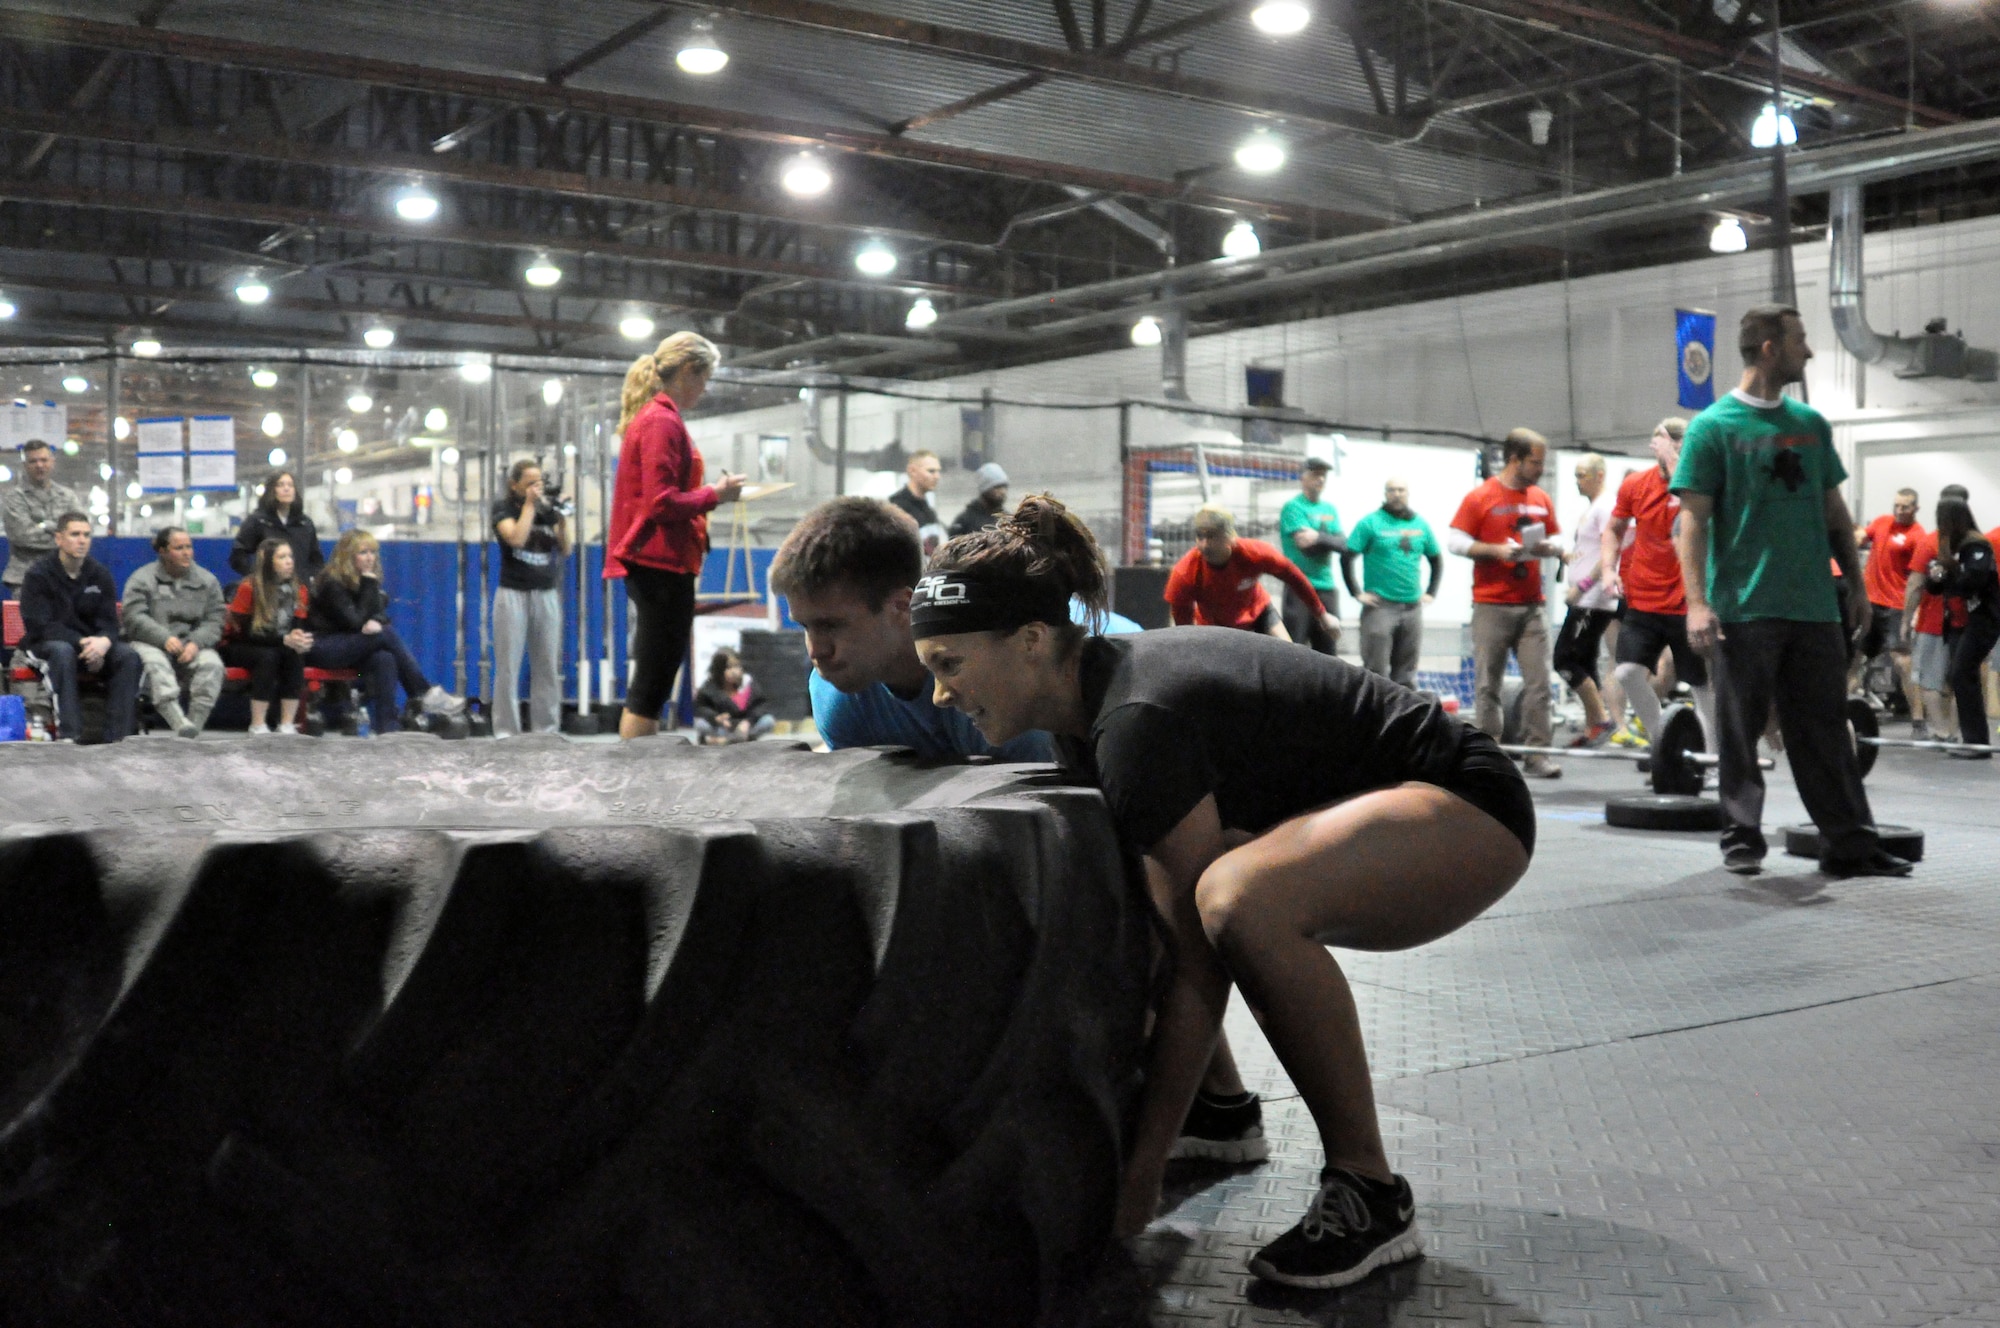 Jonathan Pingel and his teammate Terra Moyers of CrossFit Omaha flip a tractor tire as they fight to win first place for the RX division. (U.S. Air Force Photo by 2nd Lt. Carly Costello/Released)
